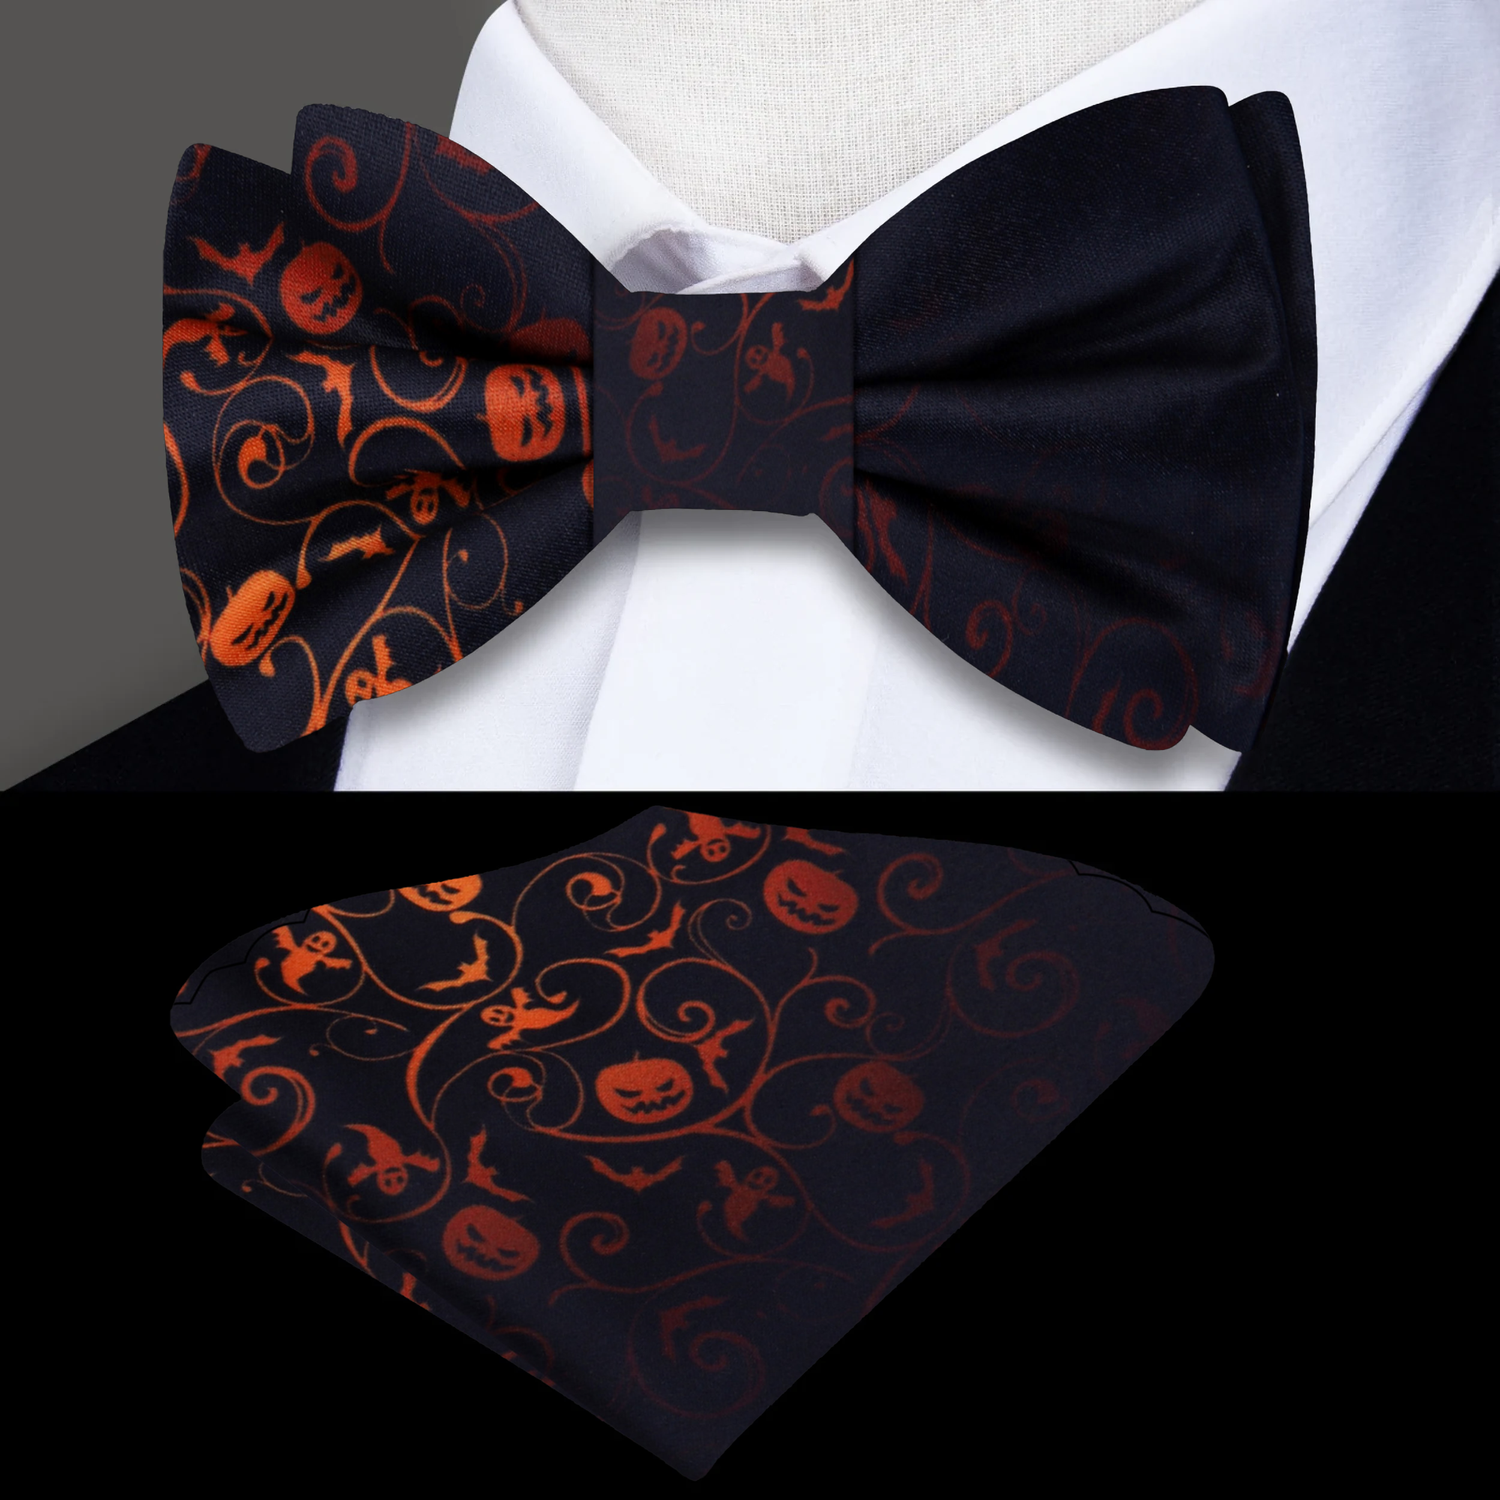 Black, Orange Vines Connecting Bats, Ghosts, And Jack-O-Lanterns Bow Tie And Pocket Square